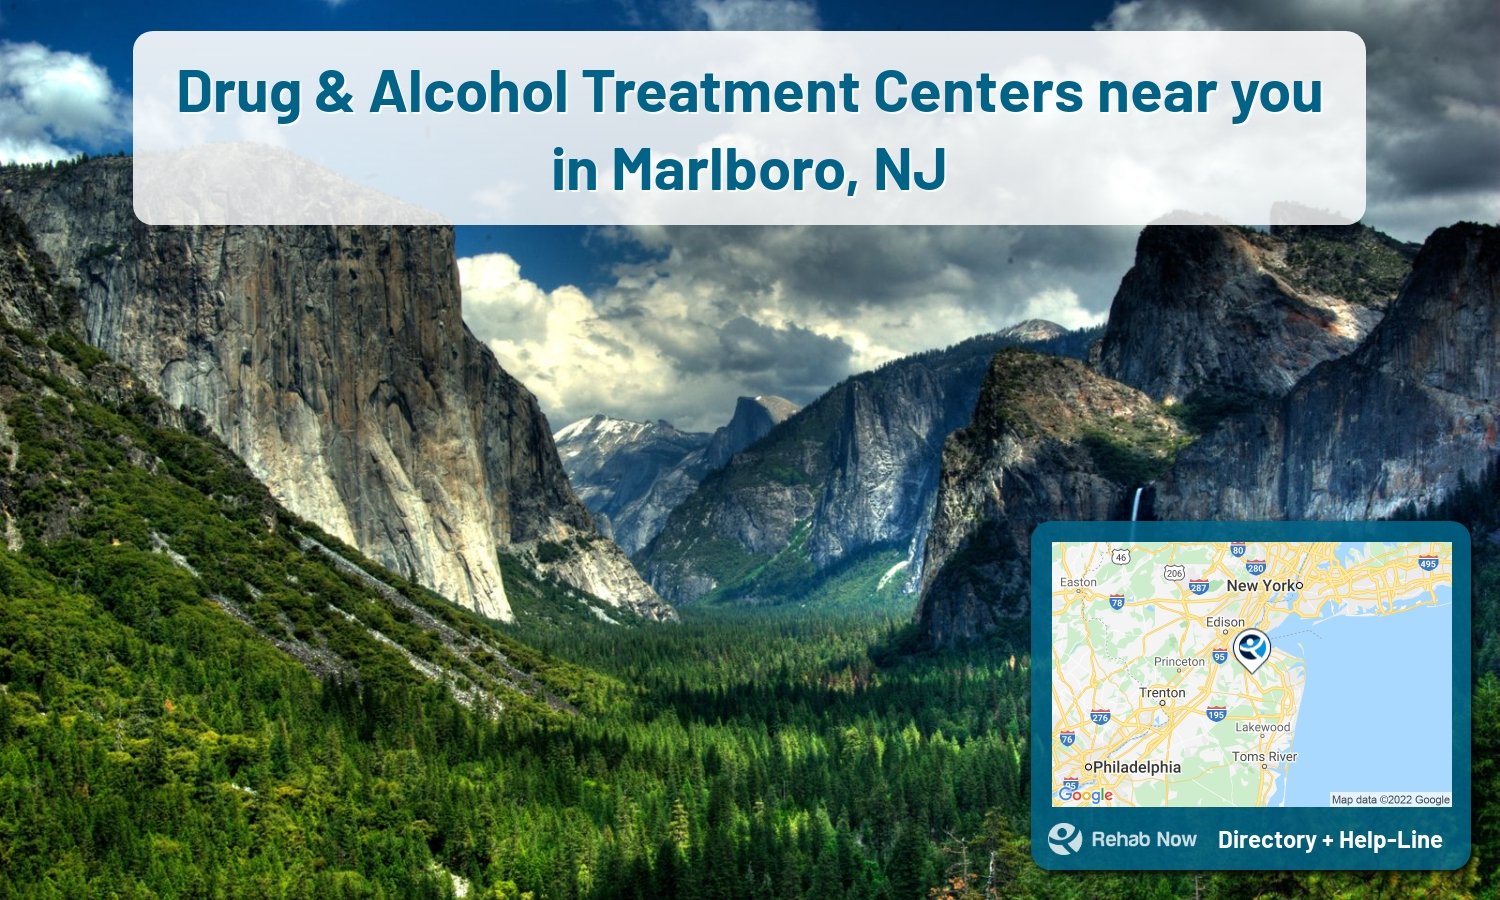 Ready to pick a rehab center in Marlboro? Get off alcohol, opiates, and other drugs, by selecting top drug rehab centers in New Jersey